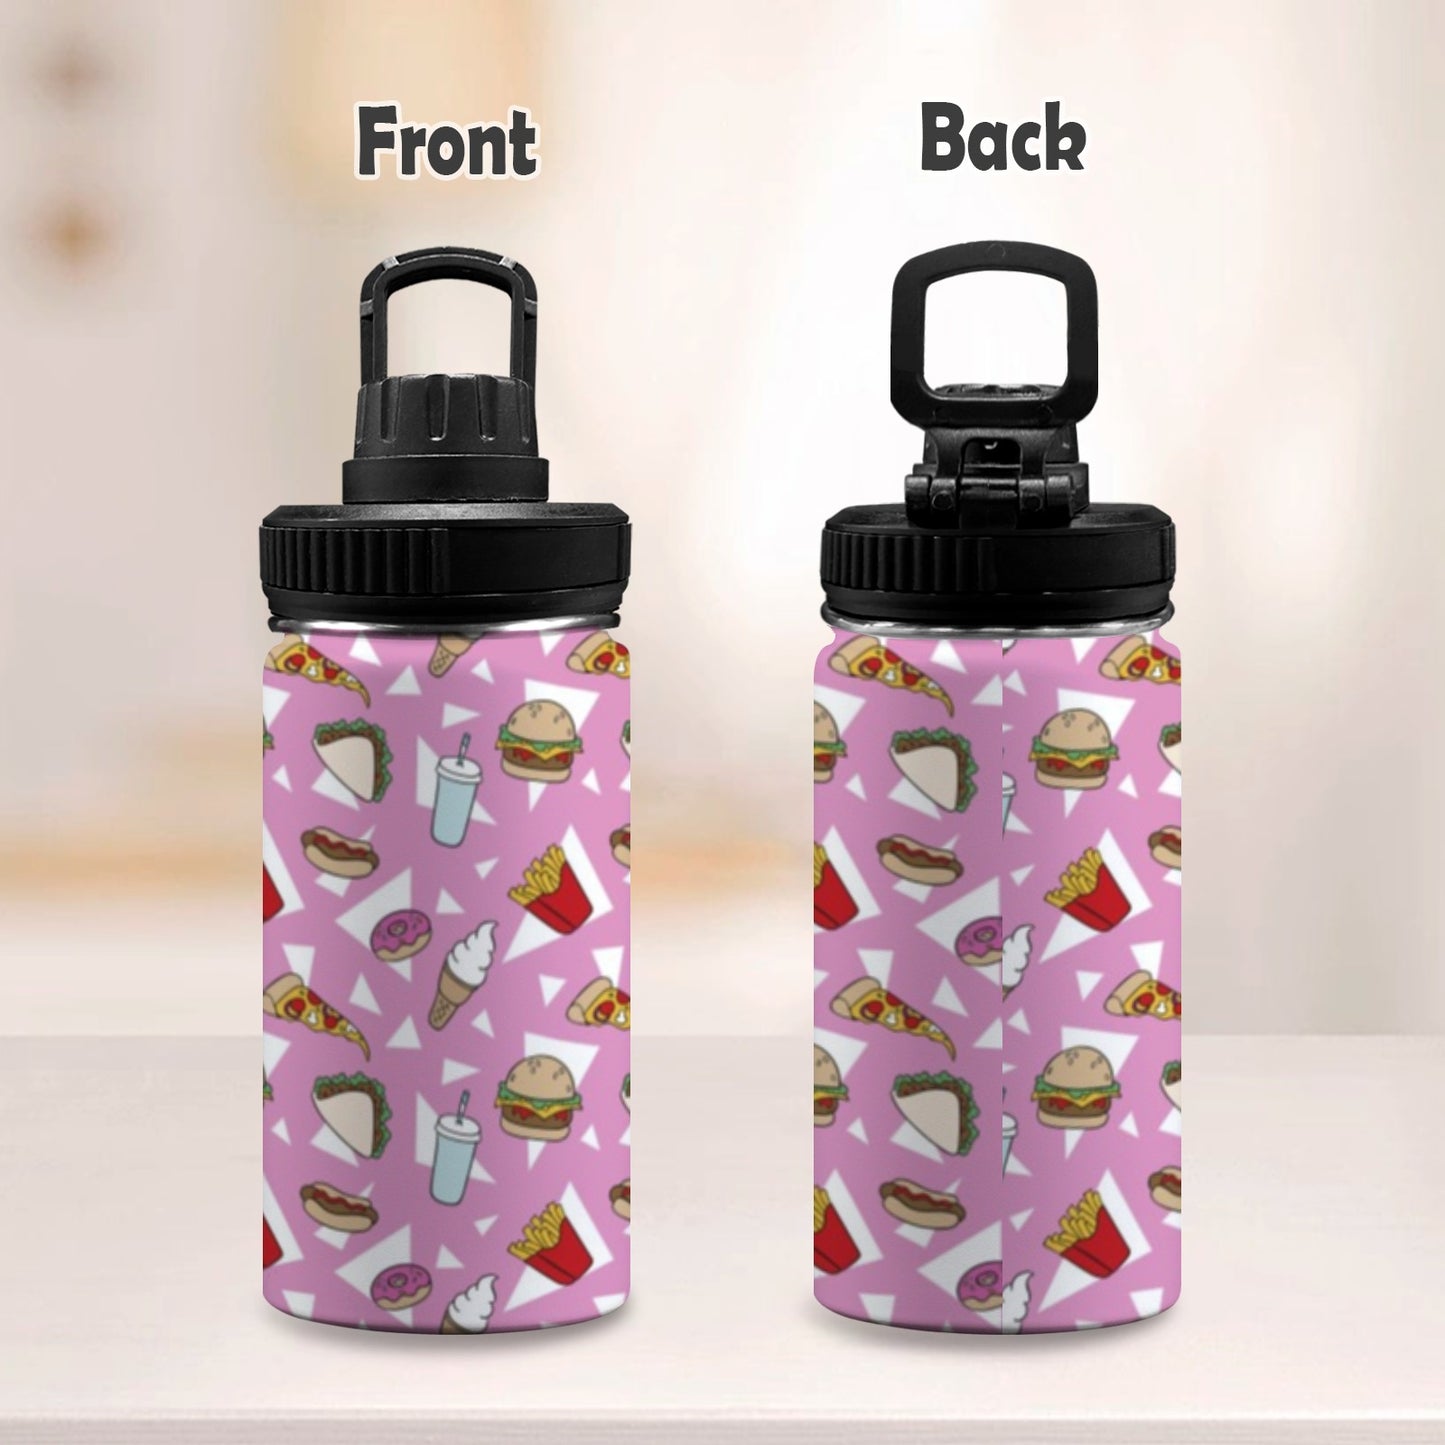 Fast Food - Kids Water Bottle with Chug Lid (12 oz) Kids Water Bottle with Chug Lid Food